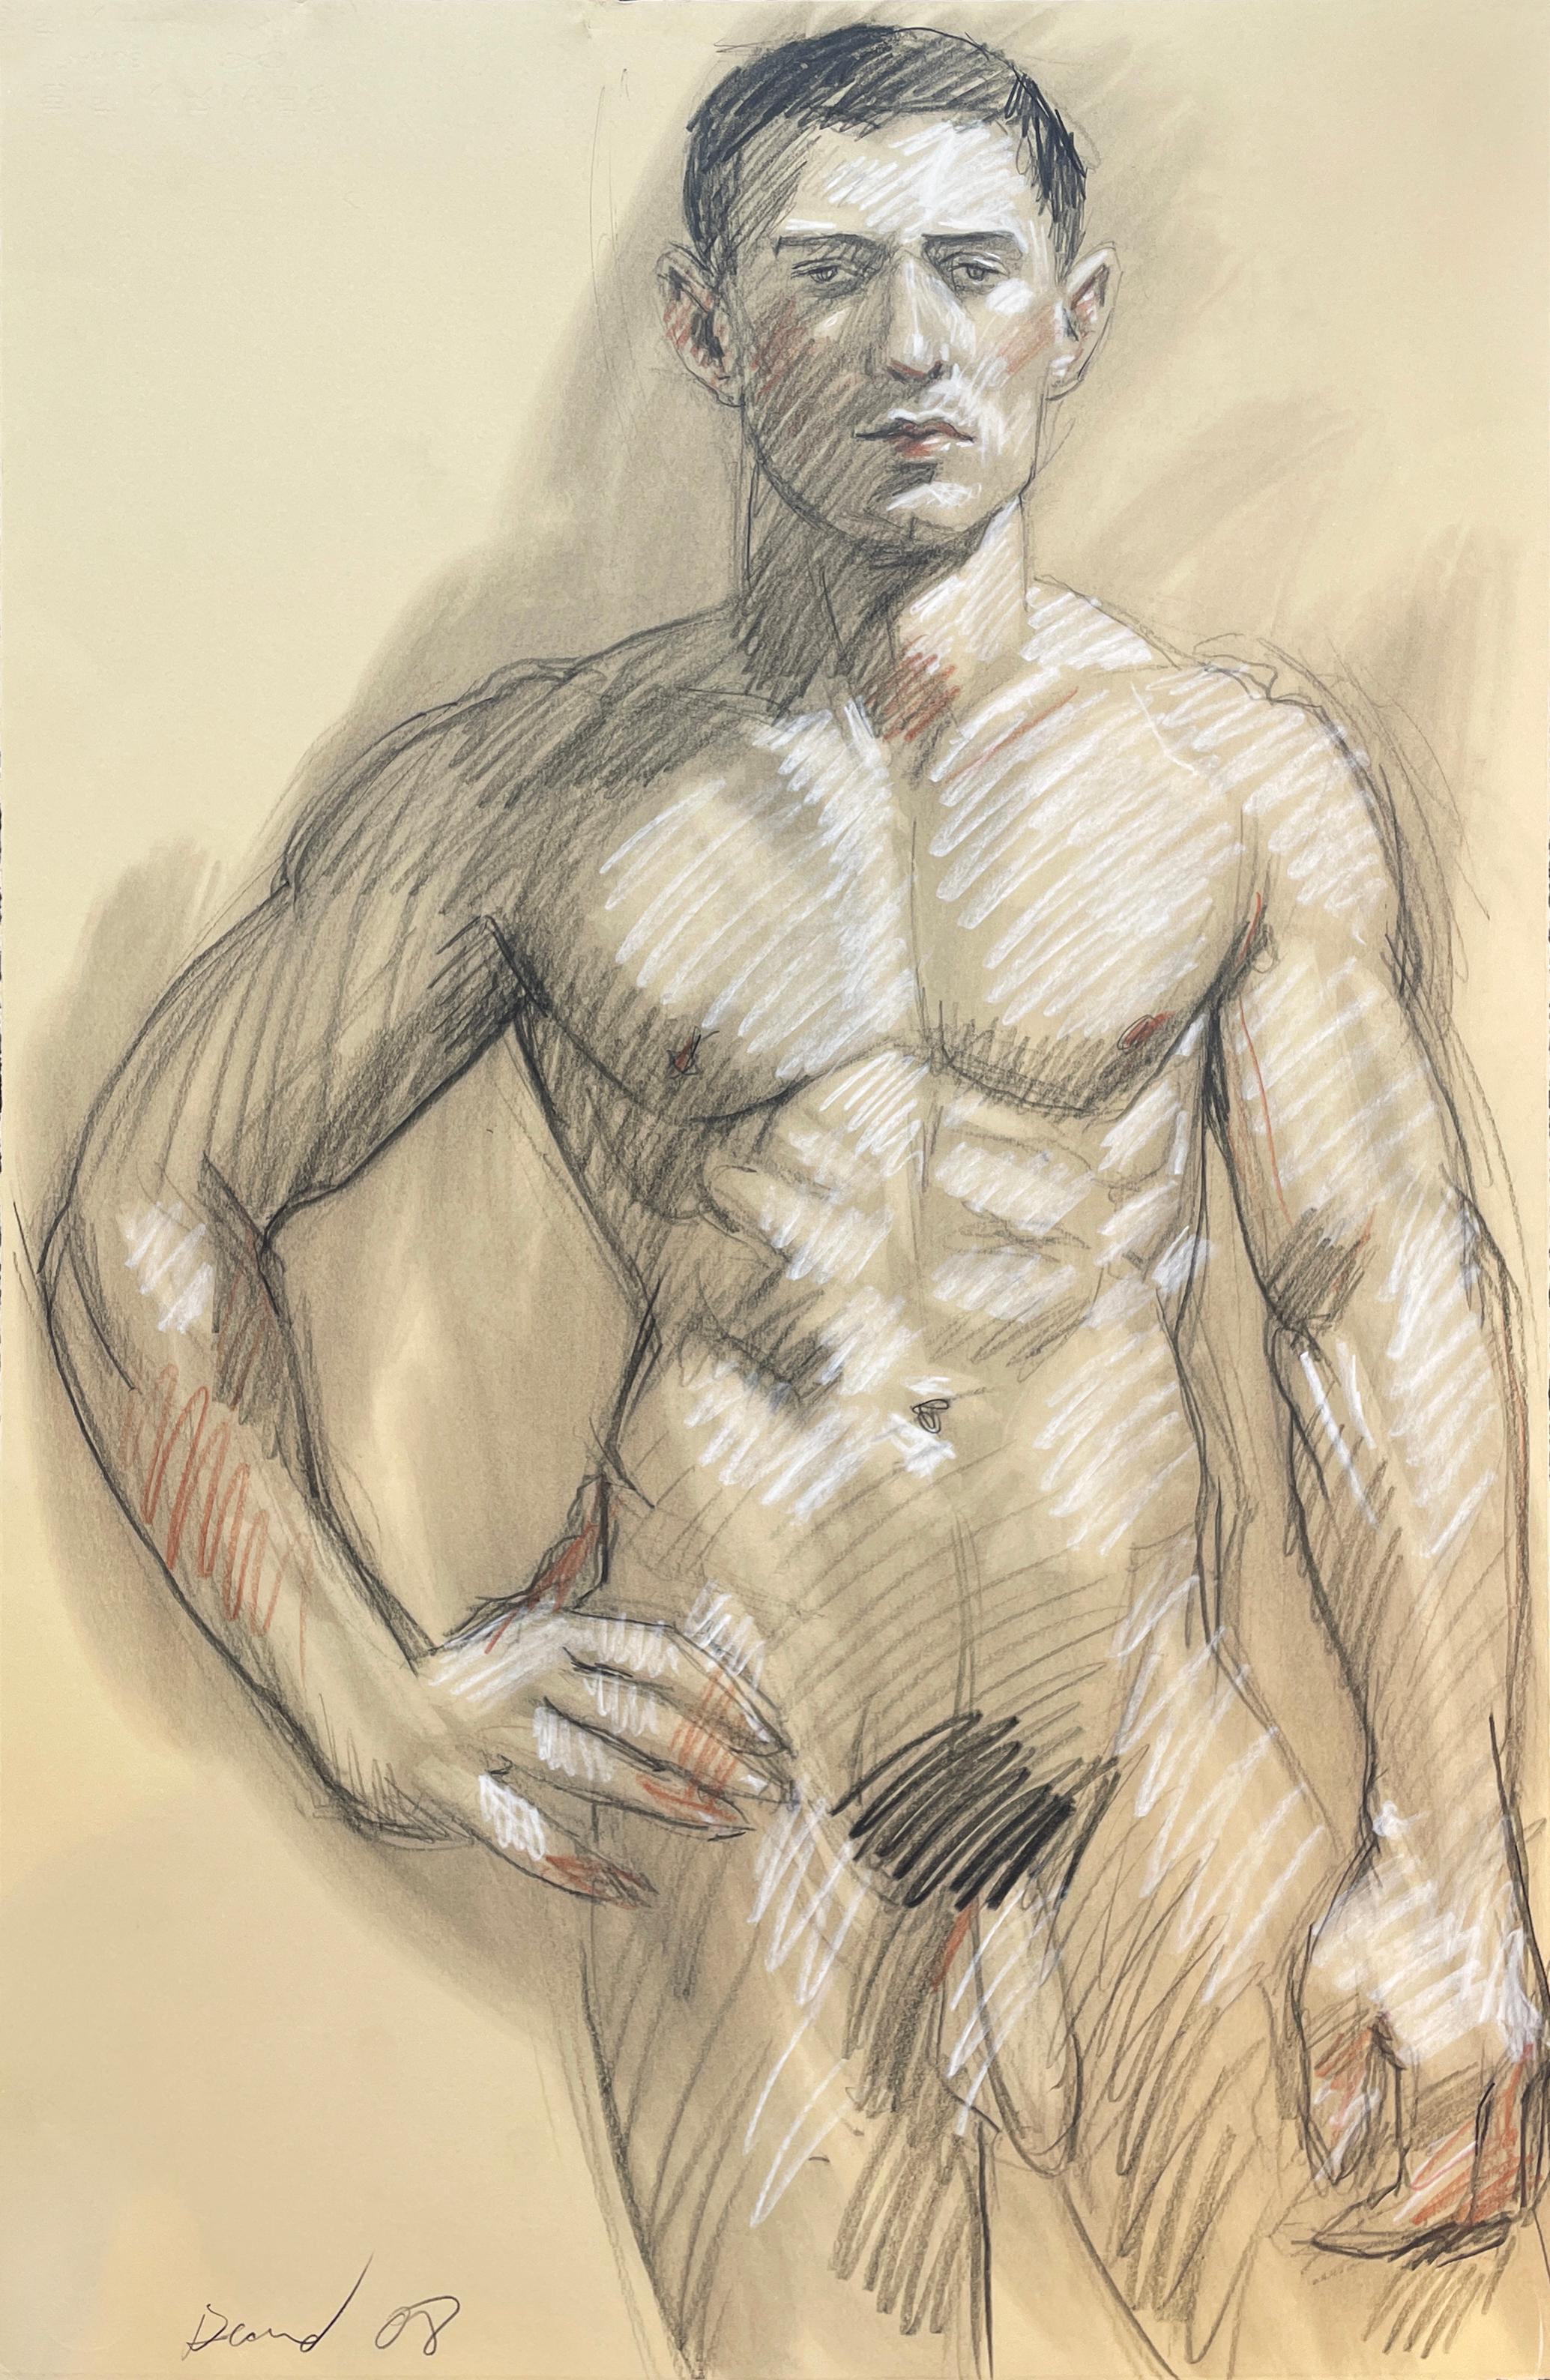 Academic life drawing of male nude with charcoal and graphite by Mark Beard
graphite, Conte crayon and charcoal on Arches paper
30 x 19.5 inches unframed
Signed, lower left

Strong facial features and upper body muscles are evidence of the artist's